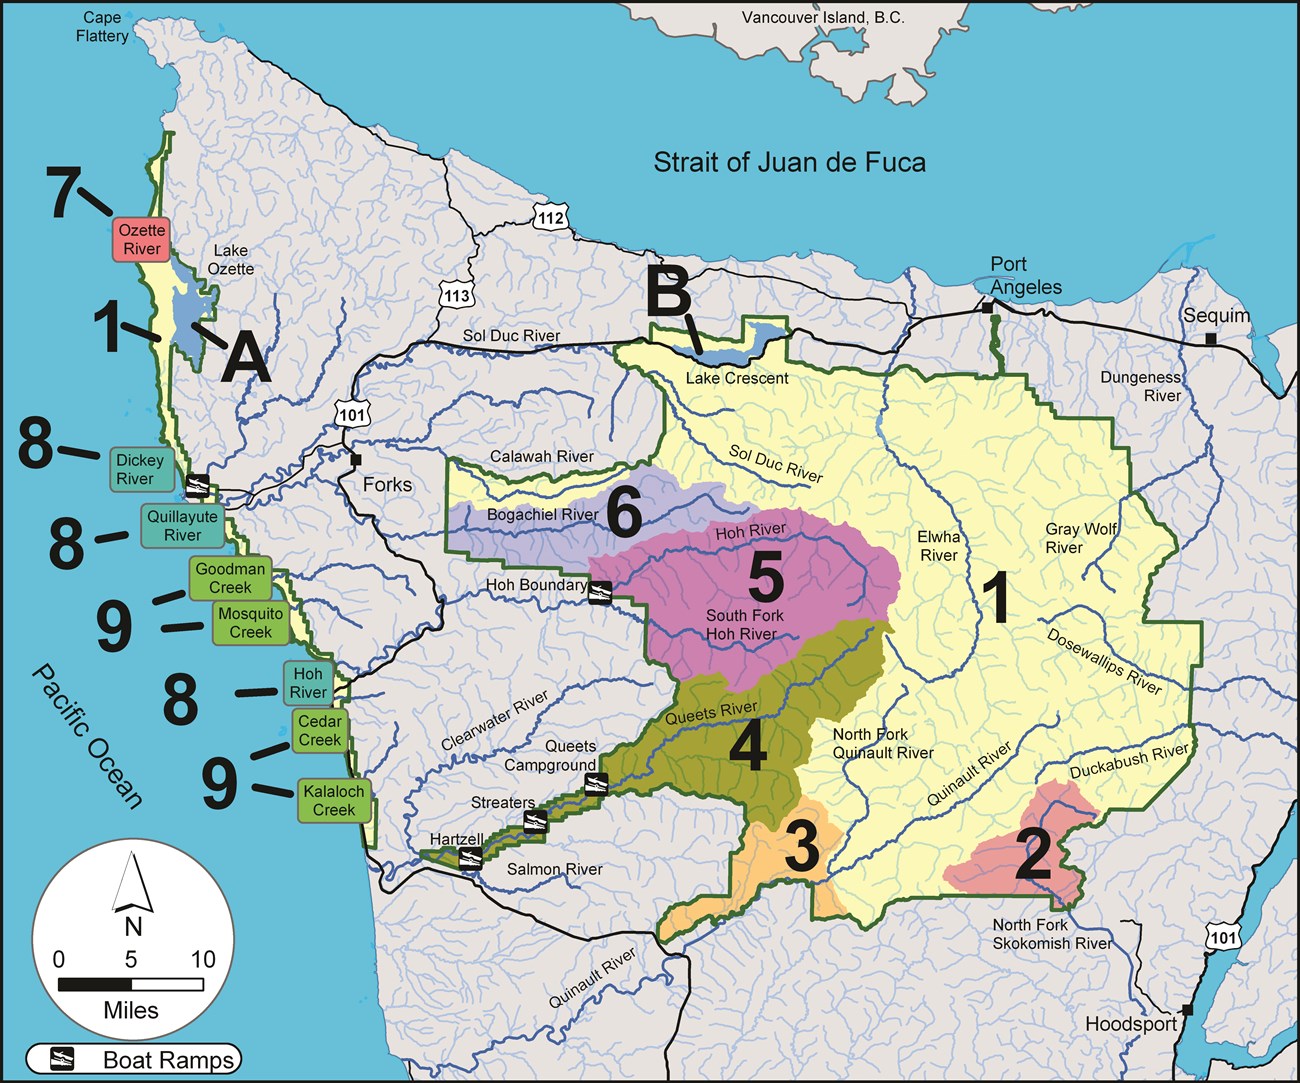 A map of the Olympic Peninsula with watersheds in Olympic National Park labeled and color coded.